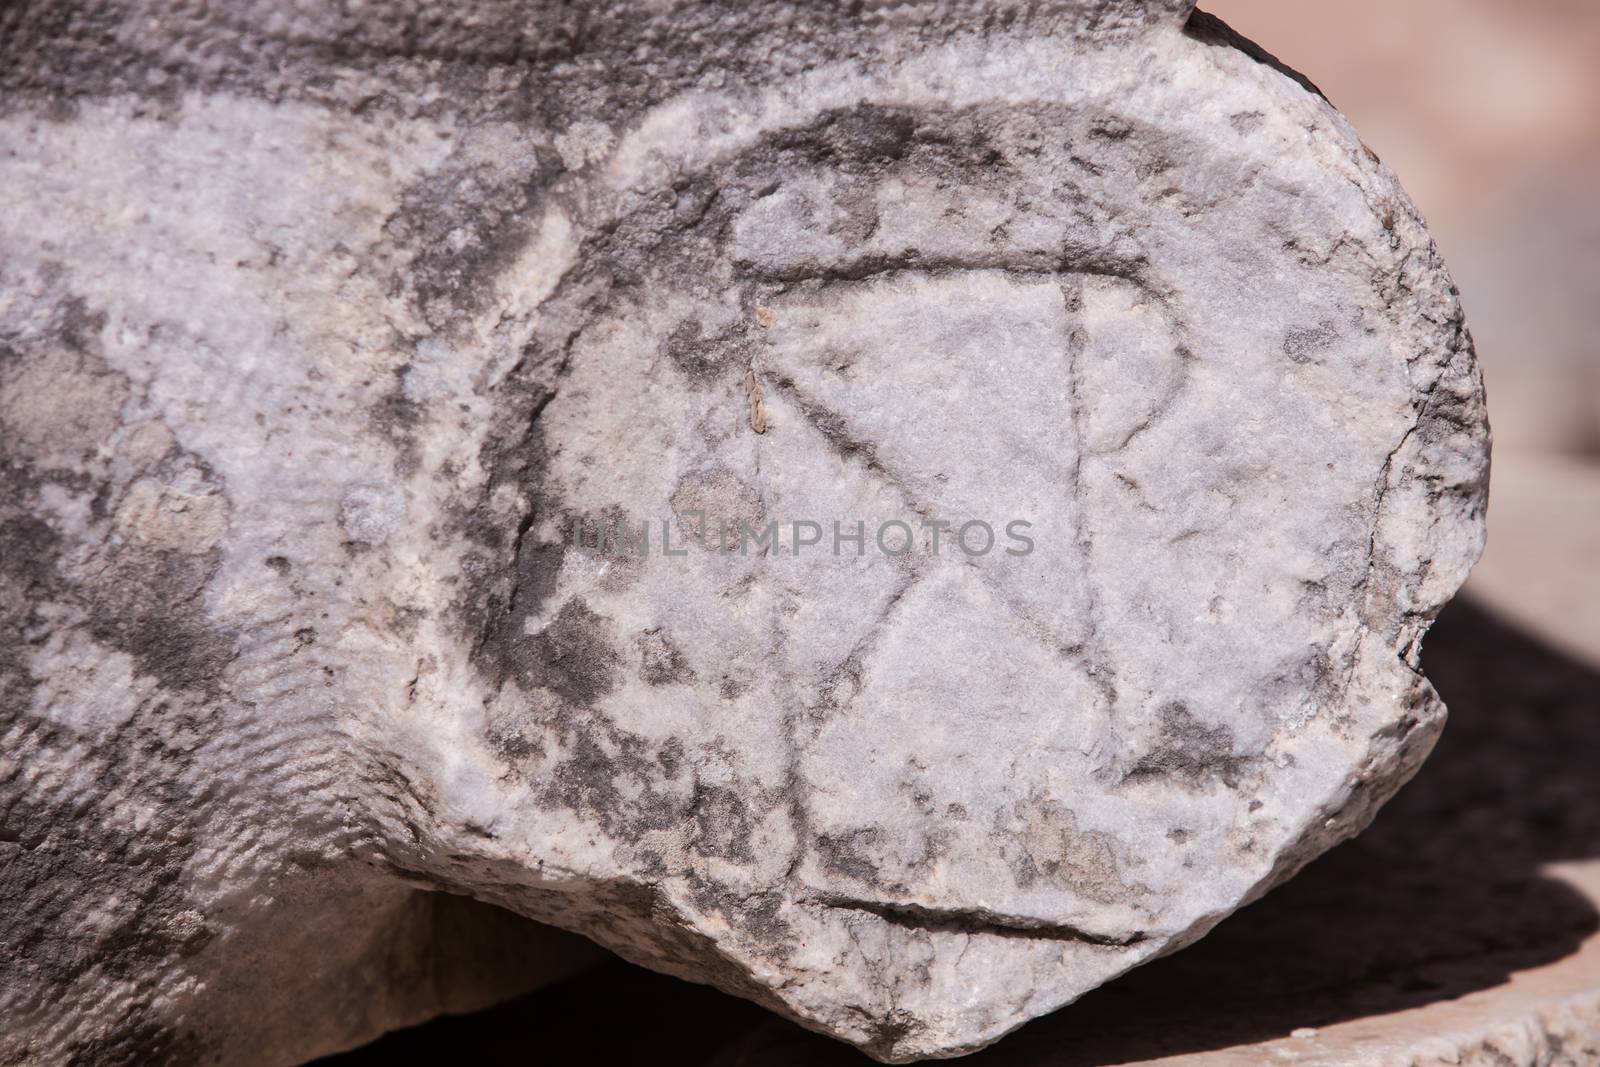 Christian symbol carved into ancient stone at Ephesus in Turkey